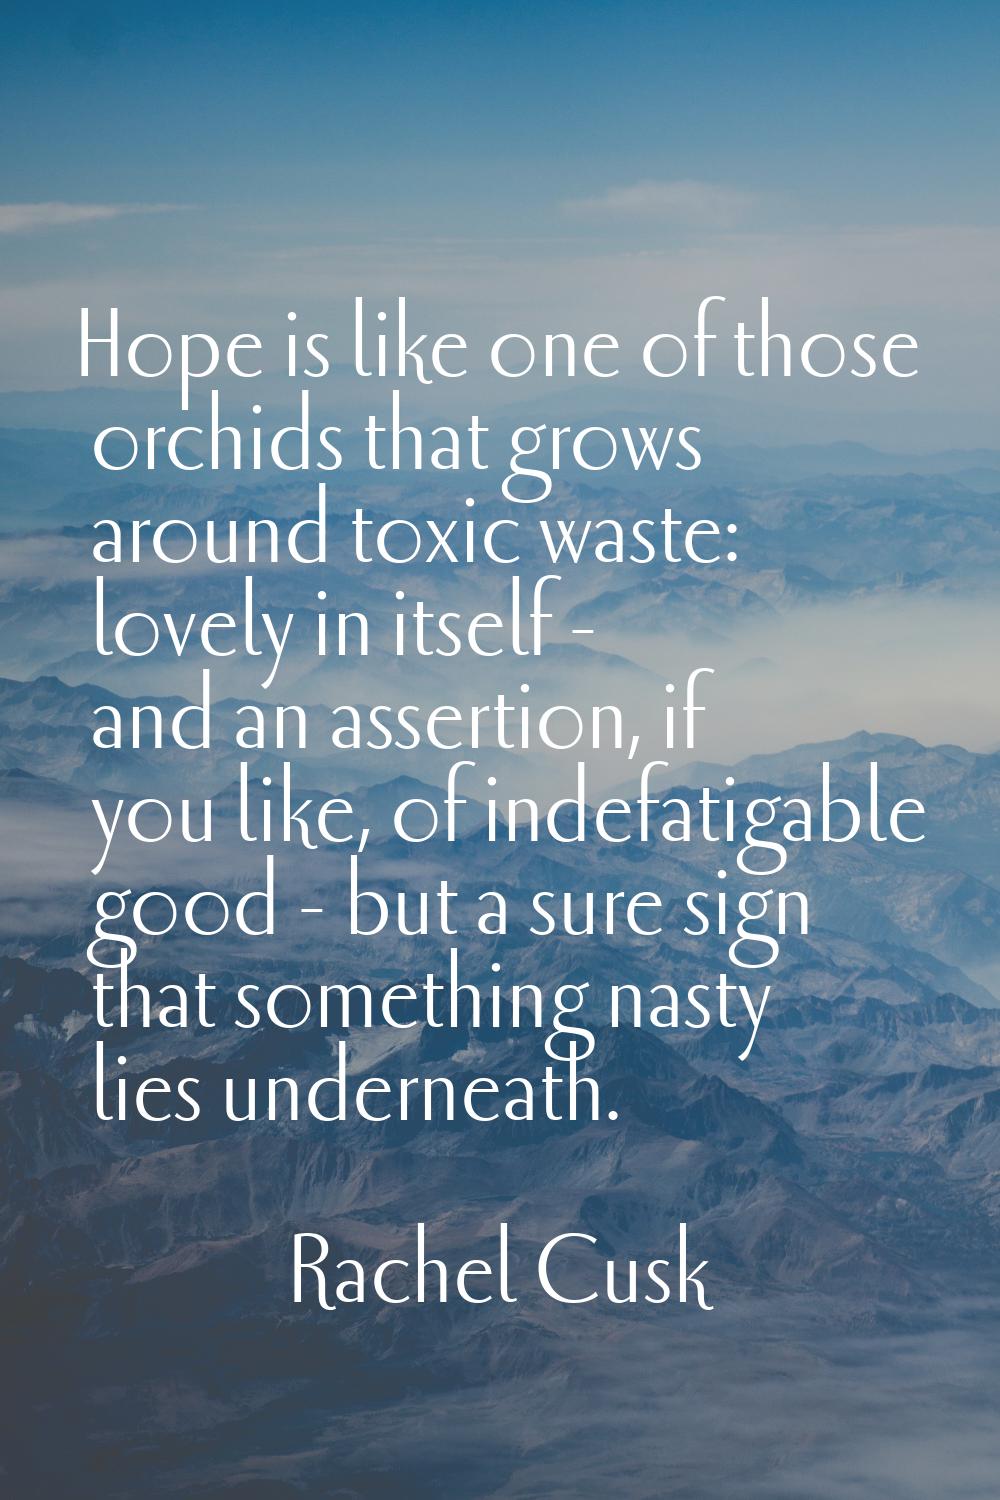 Hope is like one of those orchids that grows around toxic waste: lovely in itself - and an assertio